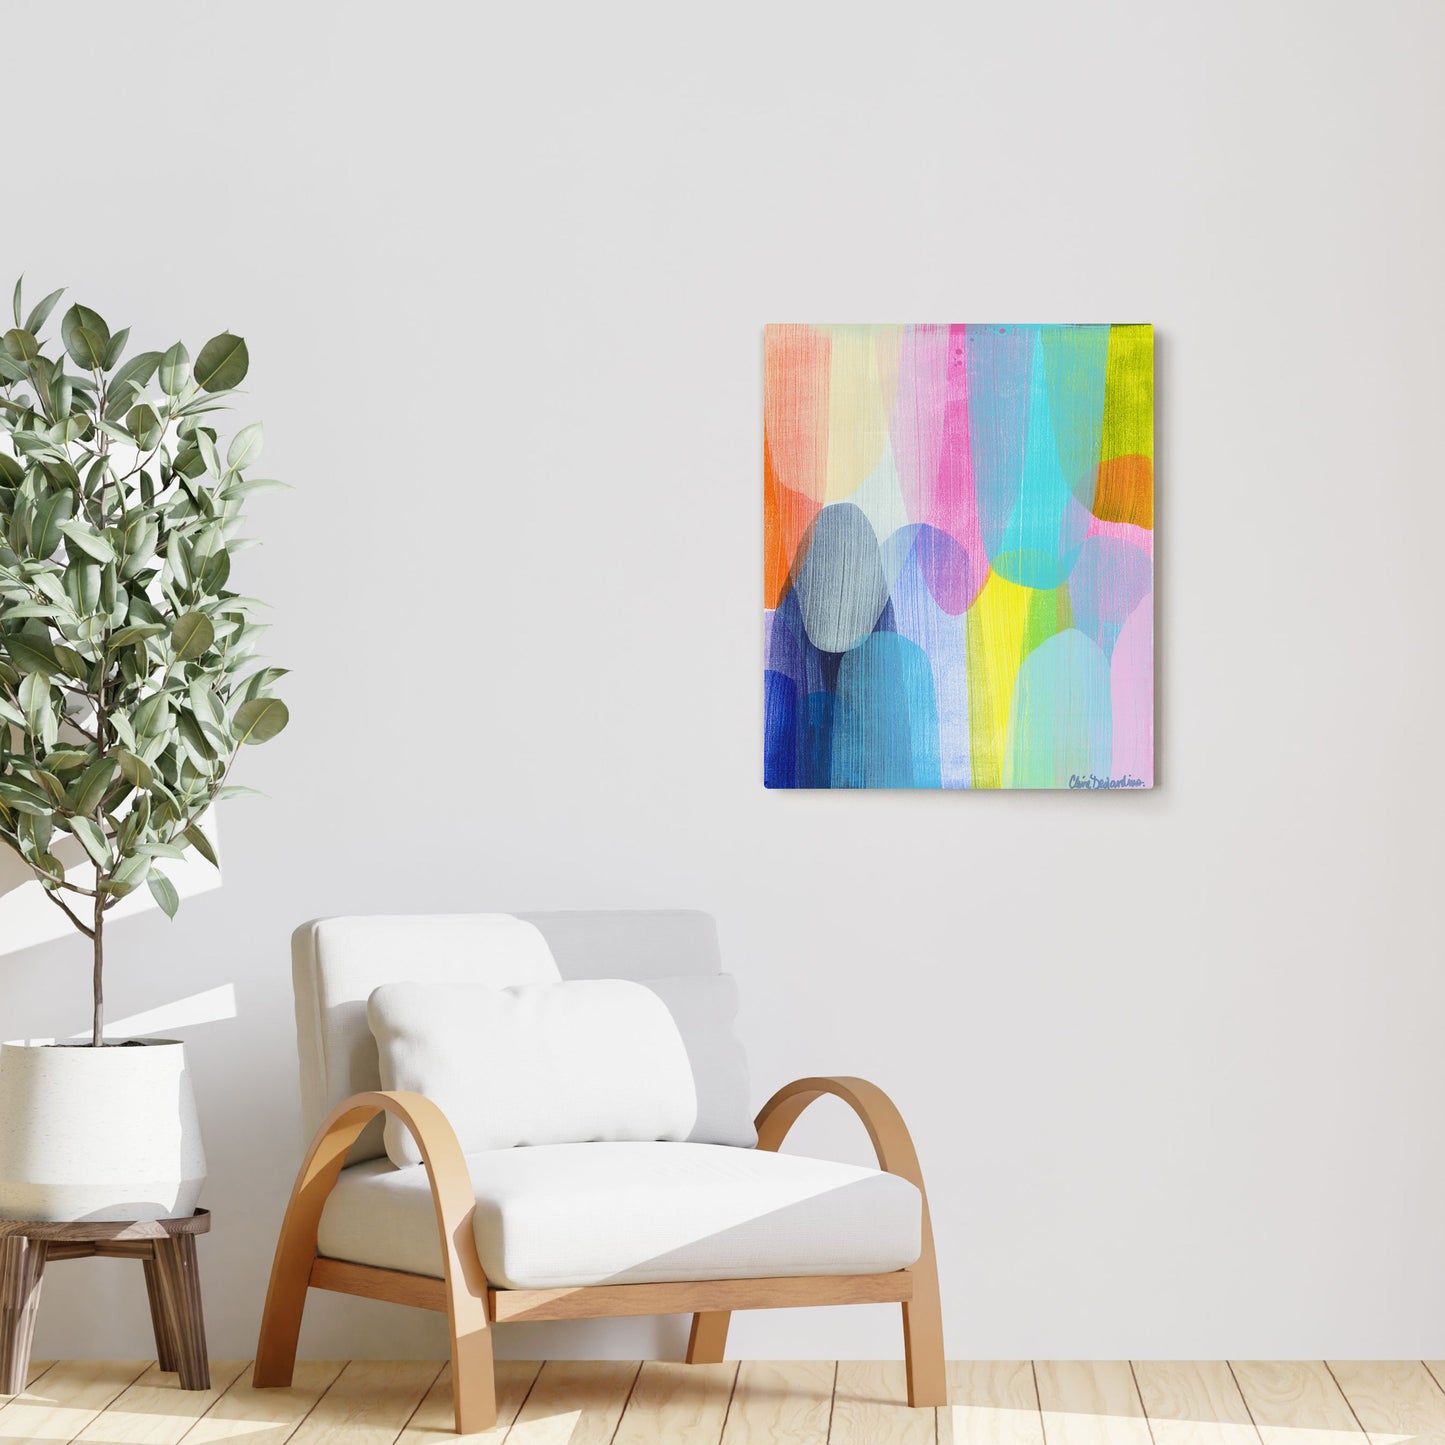 Claire Desjardins' Tickled Pink painting reproduced on HD metal print and displayed on wall